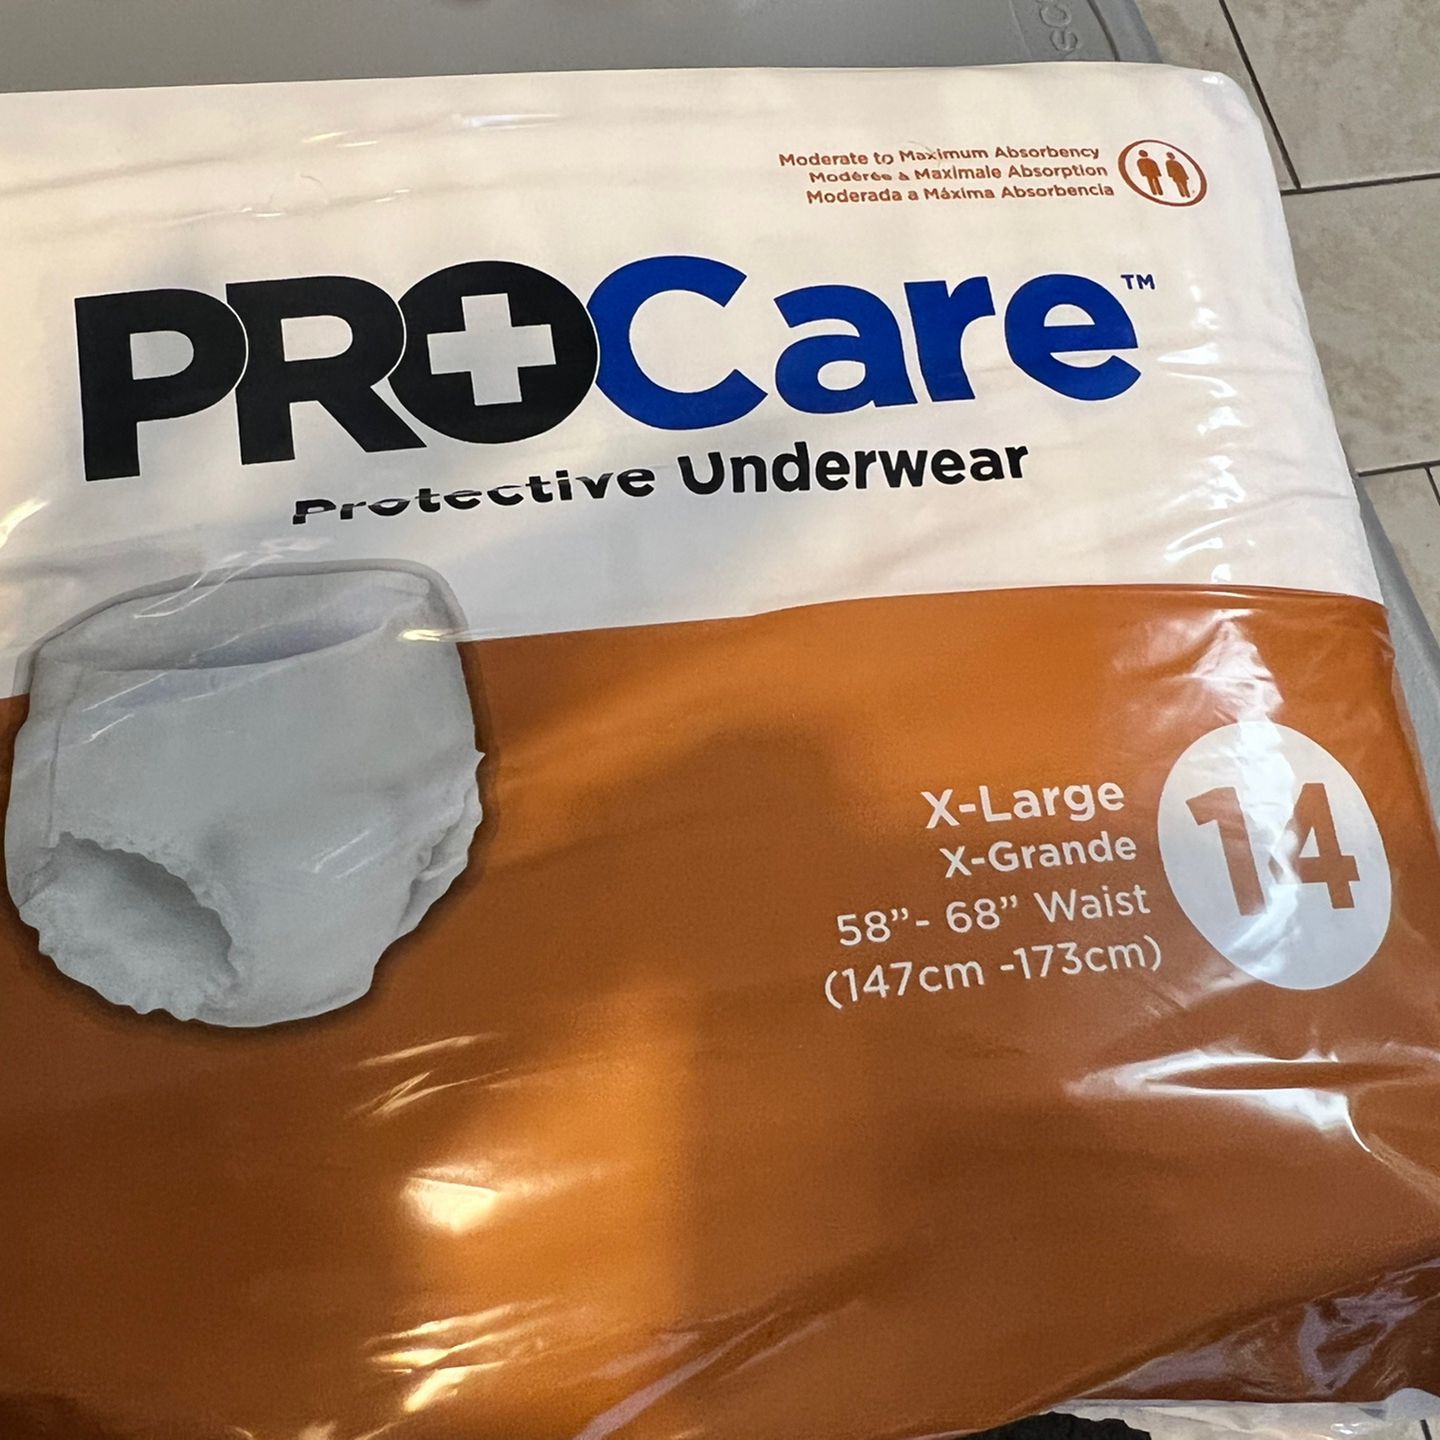 ProCare Adult Garments Underwear XL 21 Packages of 14 for Sale in